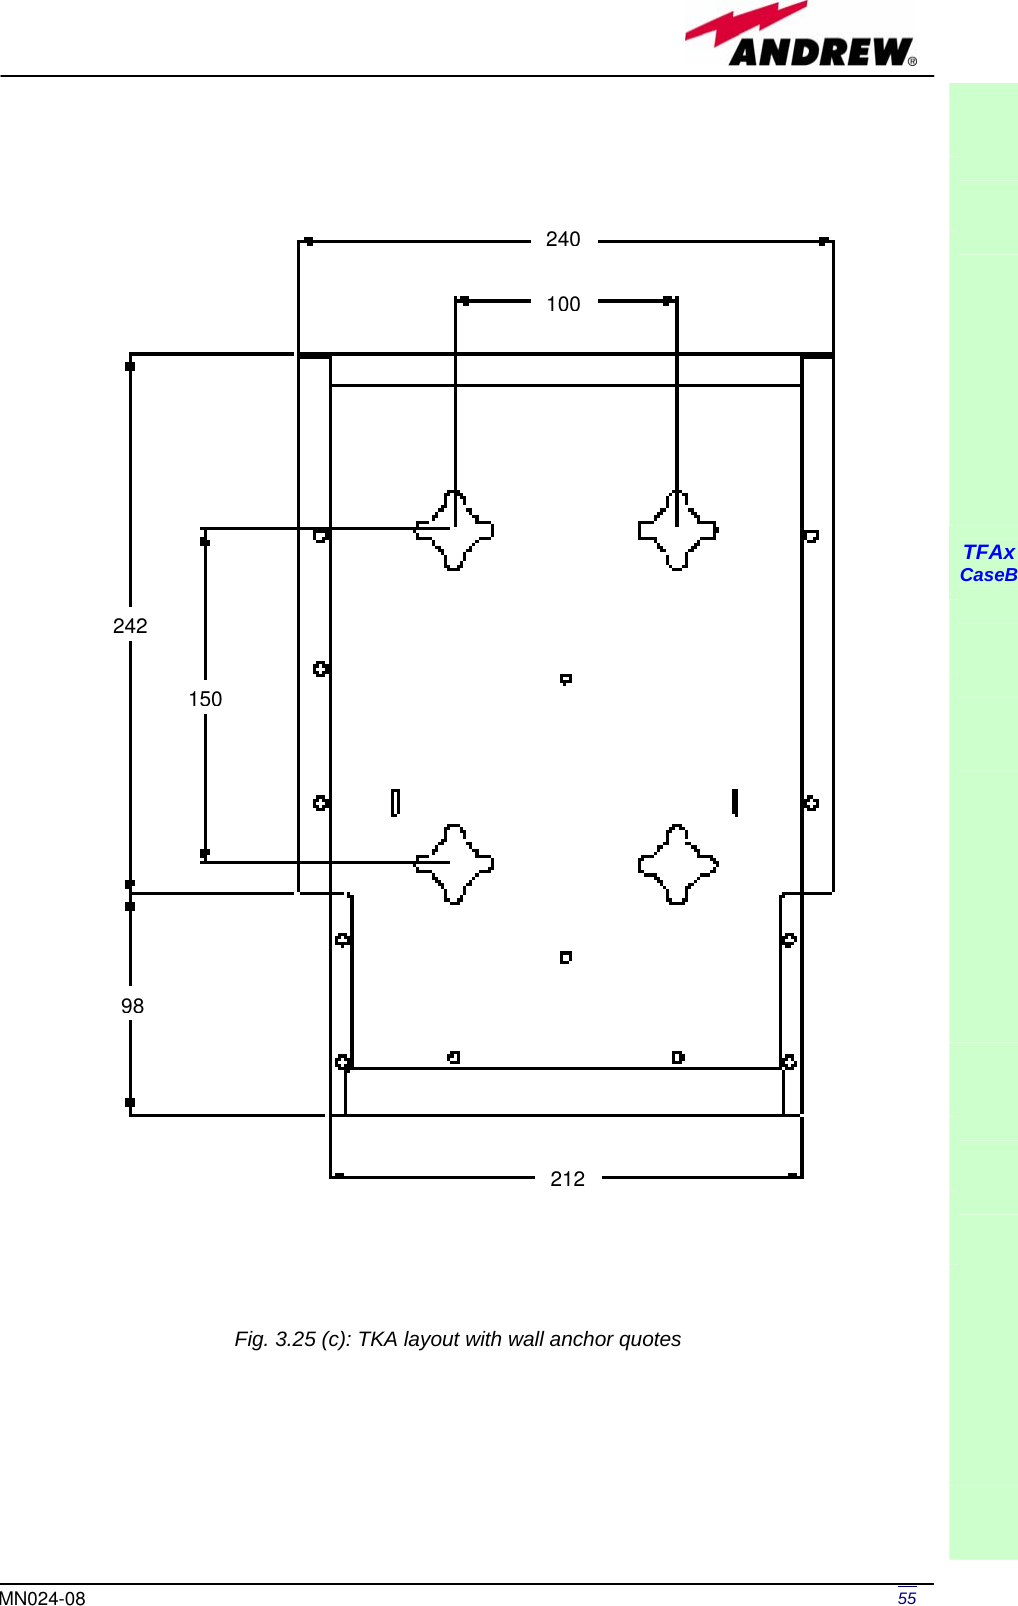   55MN024-08                                                                   TFAx CaseB             Fig. 3.25 (c): TKA layout with wall anchor quotes 24010024215098212